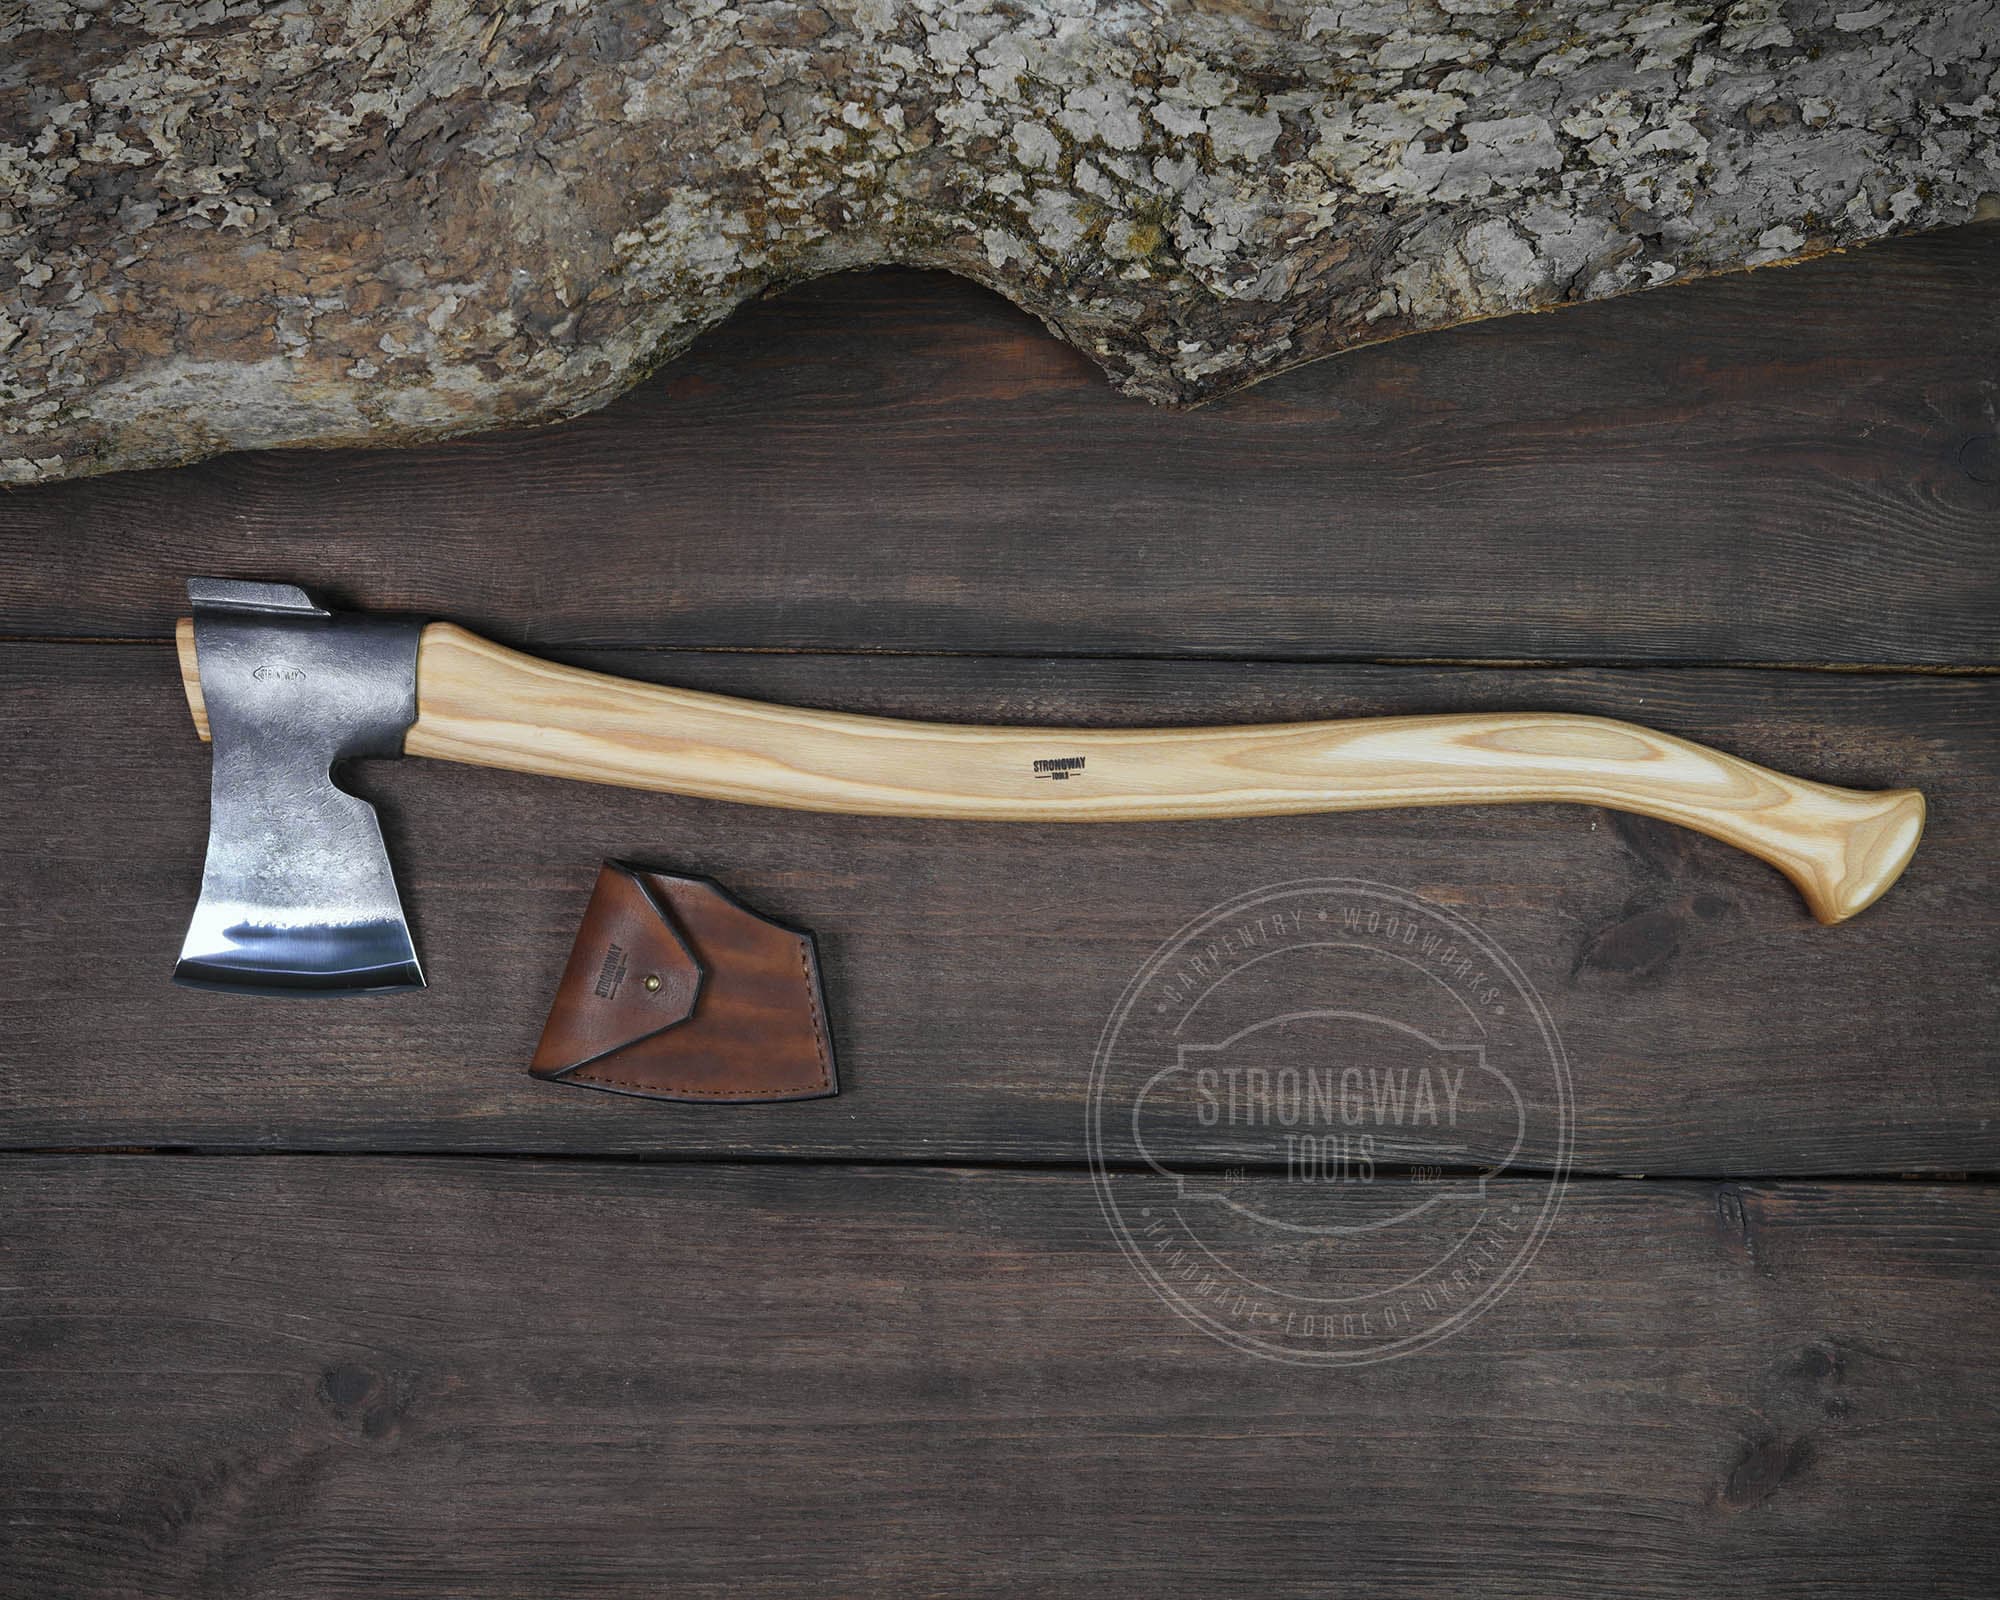 Small Finnish Carving Axe with Octogonal Handle > STRONGWAY TOOLS, L.L.C.